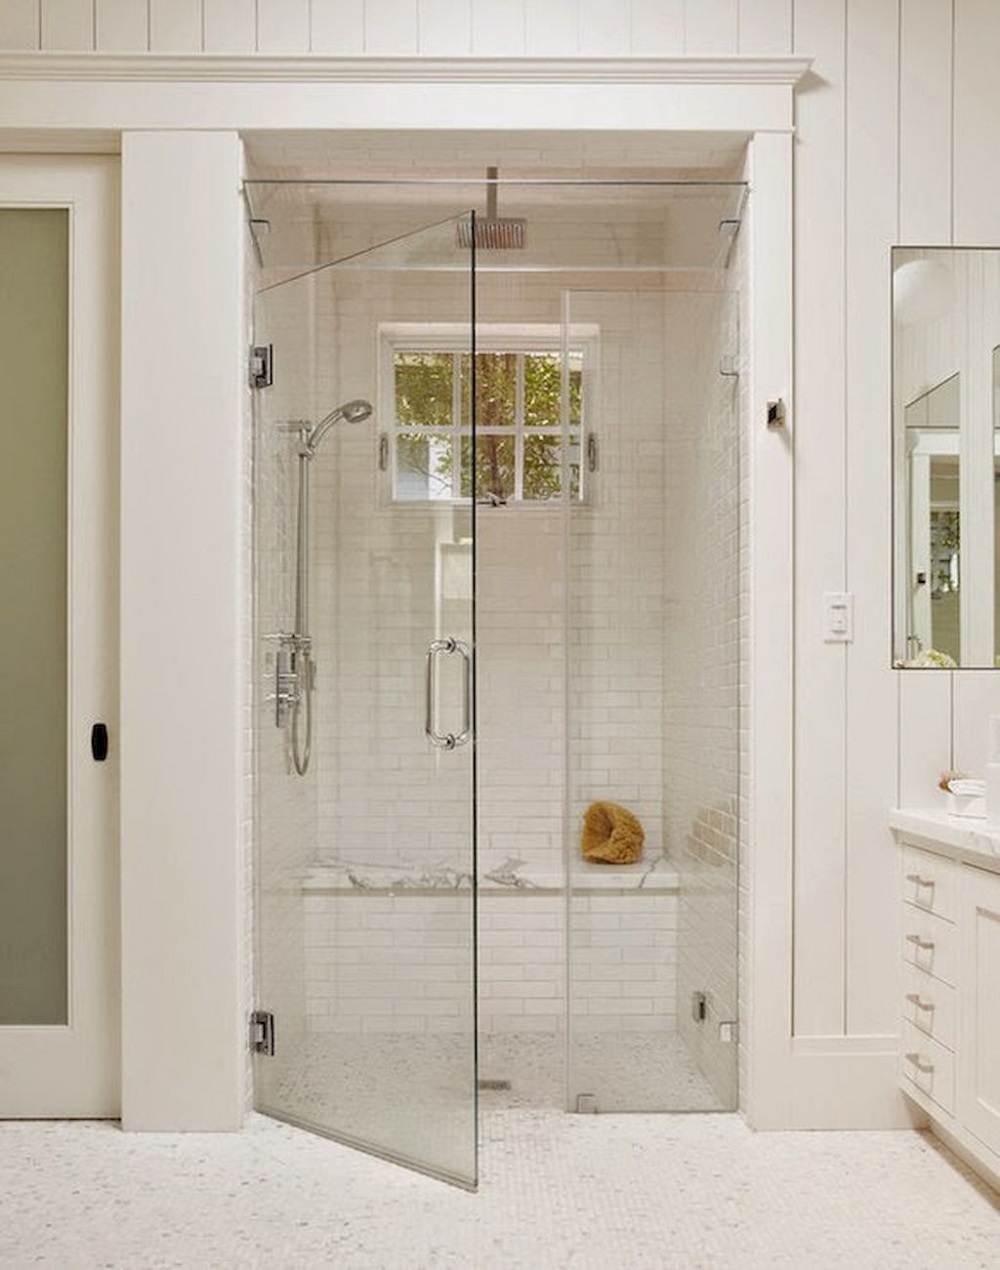 wb10 Walk-in shower ideas and tips for having one (cost, size, and more)